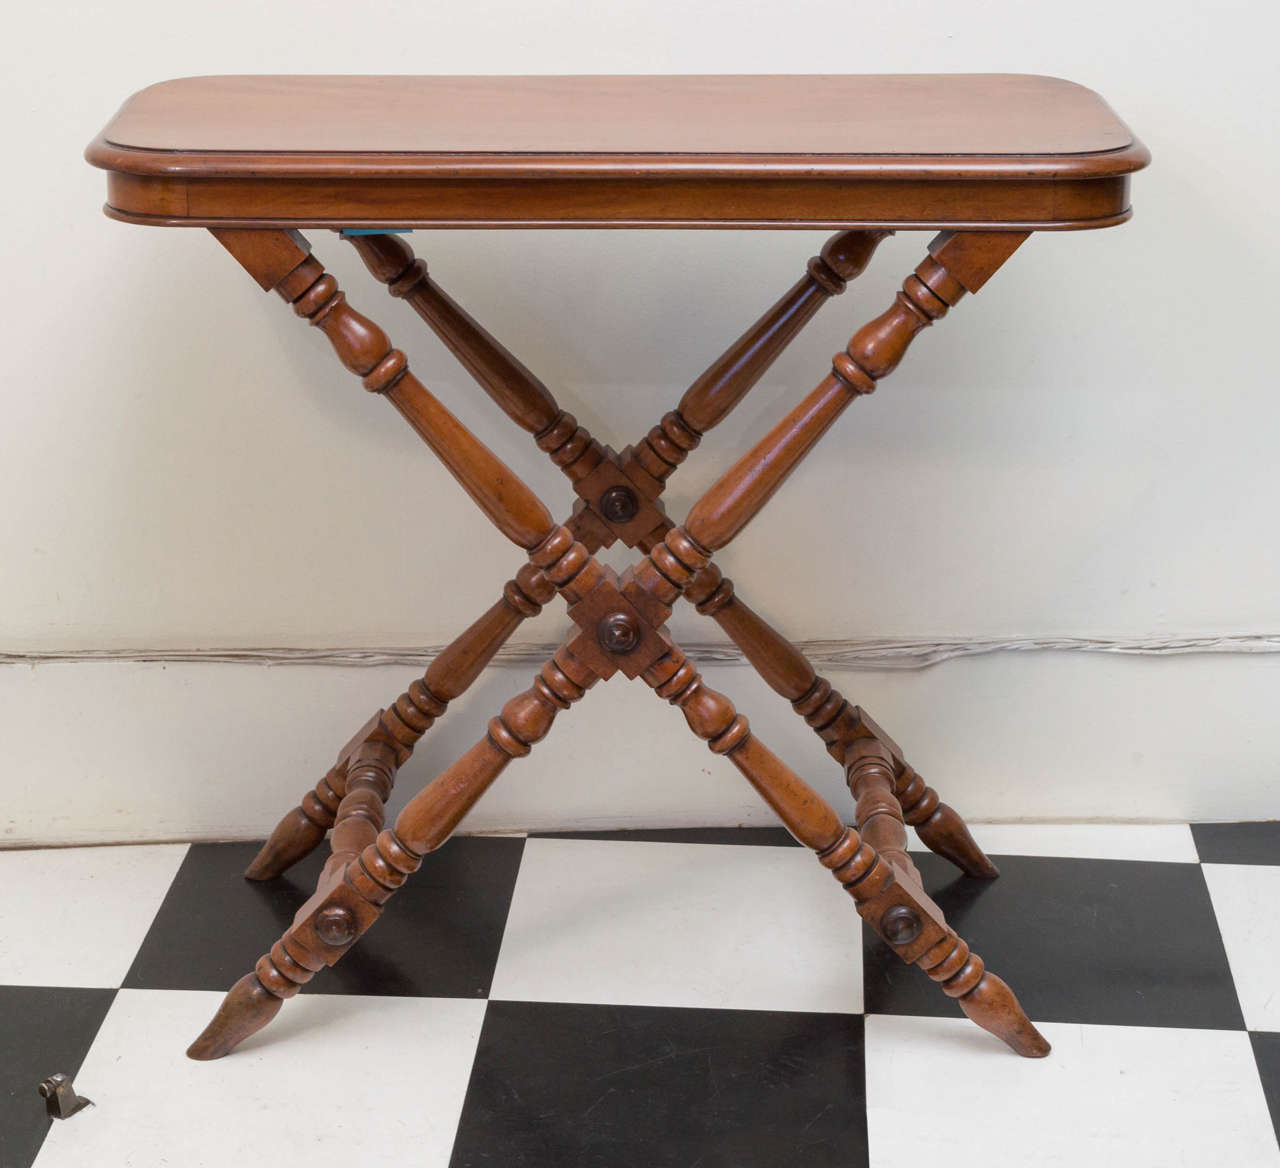 19th c. English Walnut campaign style server of excellent proportions. Solid boards and turning with sturdy fixed legs and crossed stretcher base. Very good antique surface.